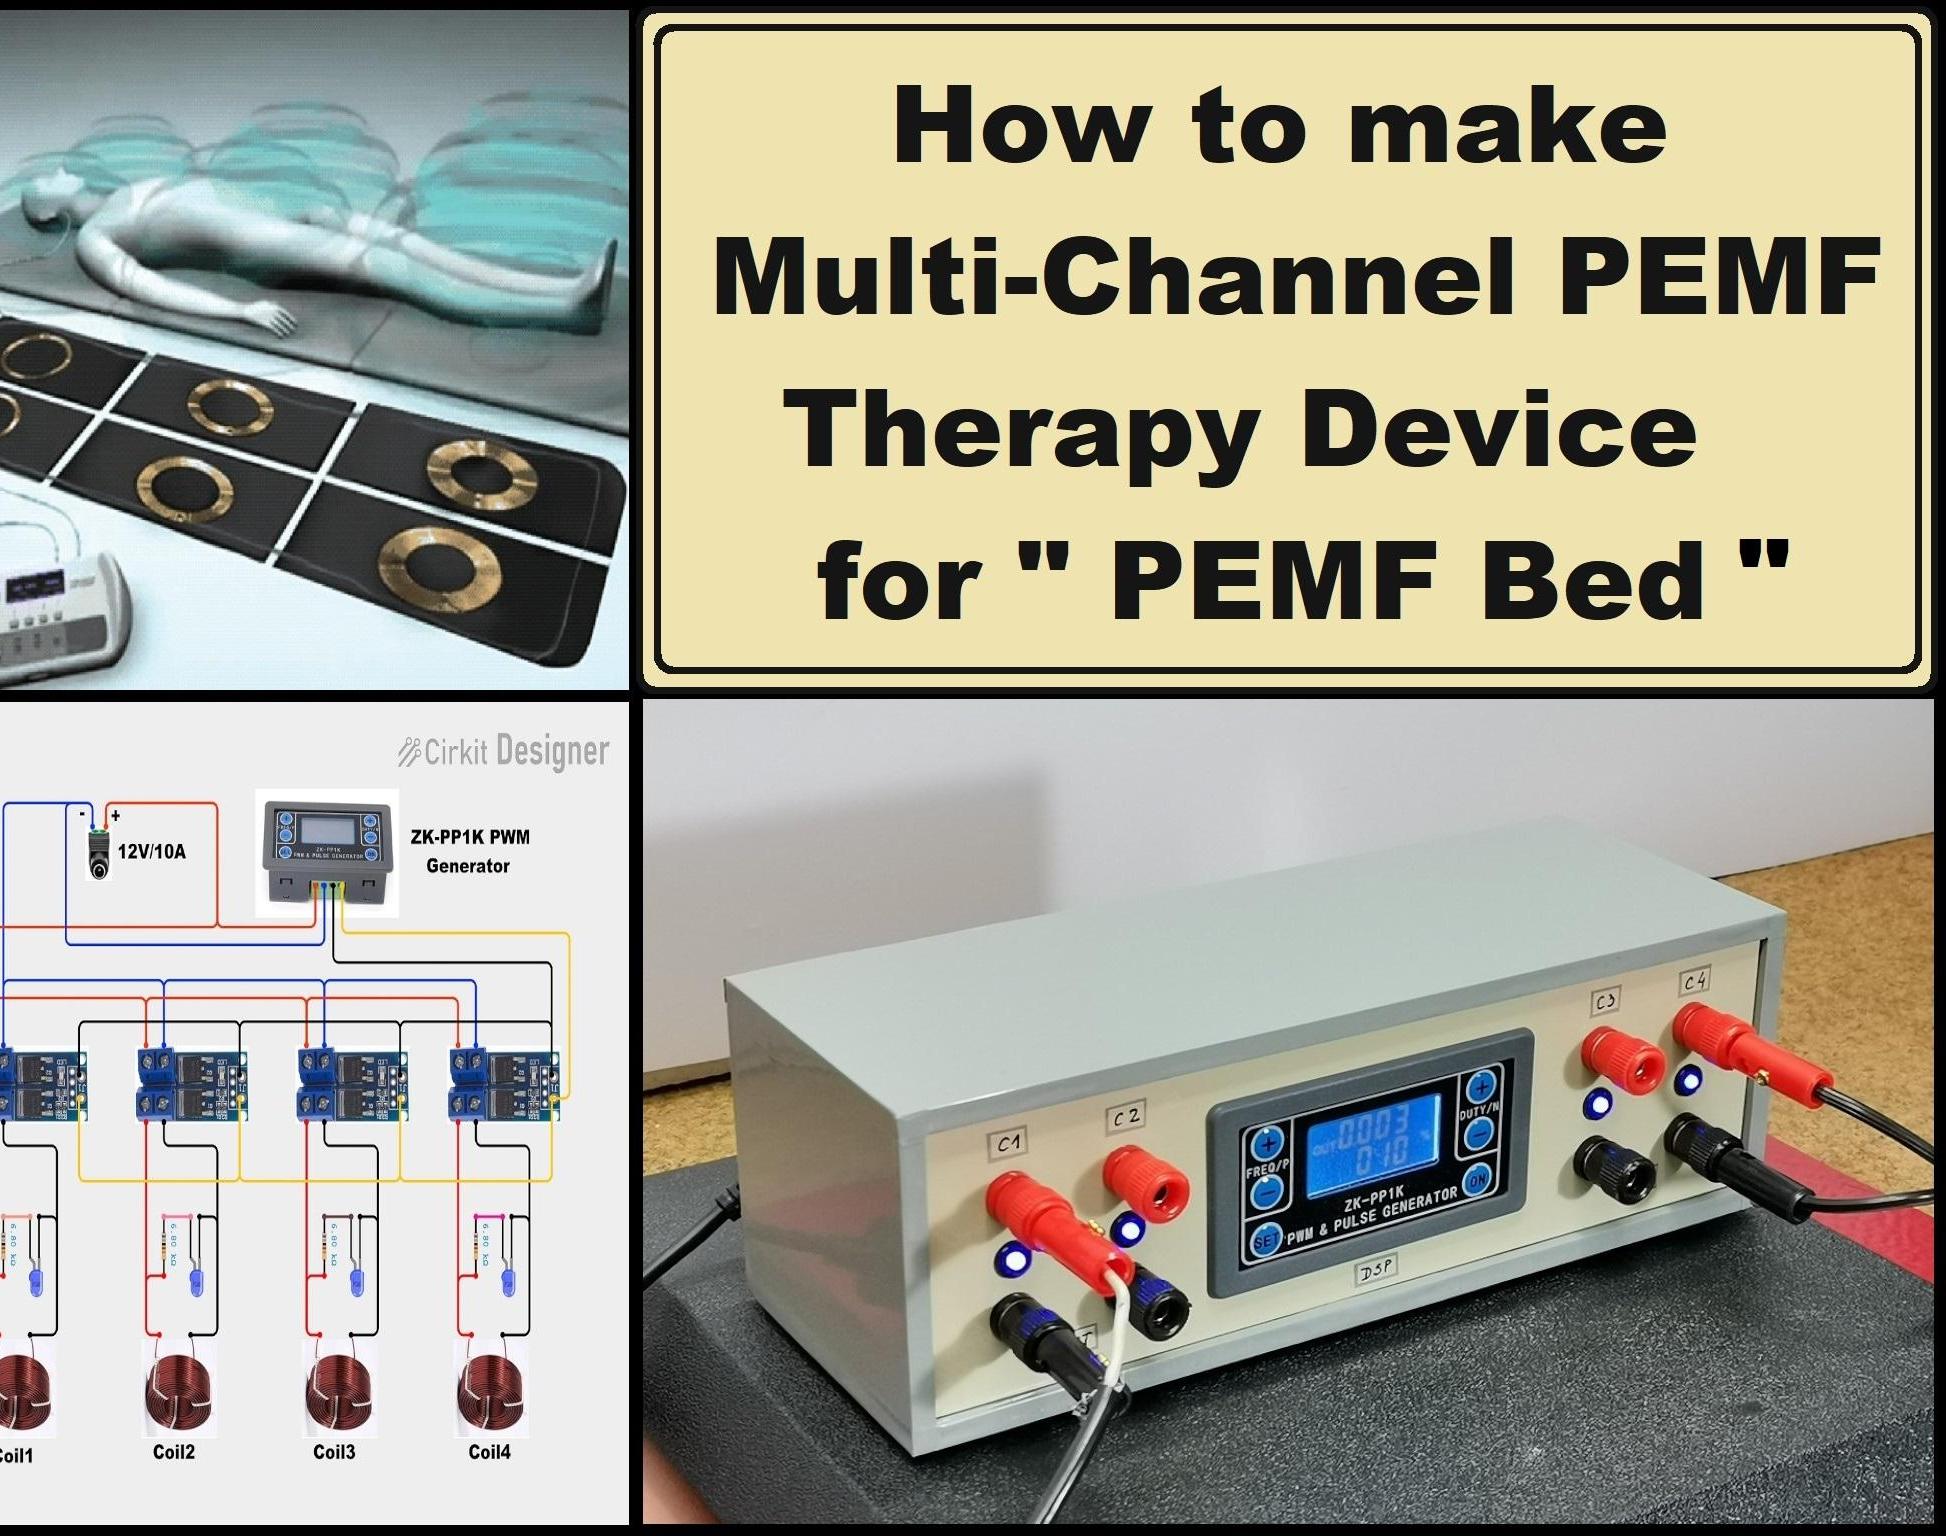 How to Make Multichannel PEMF Therapy Device for PEMF Bed